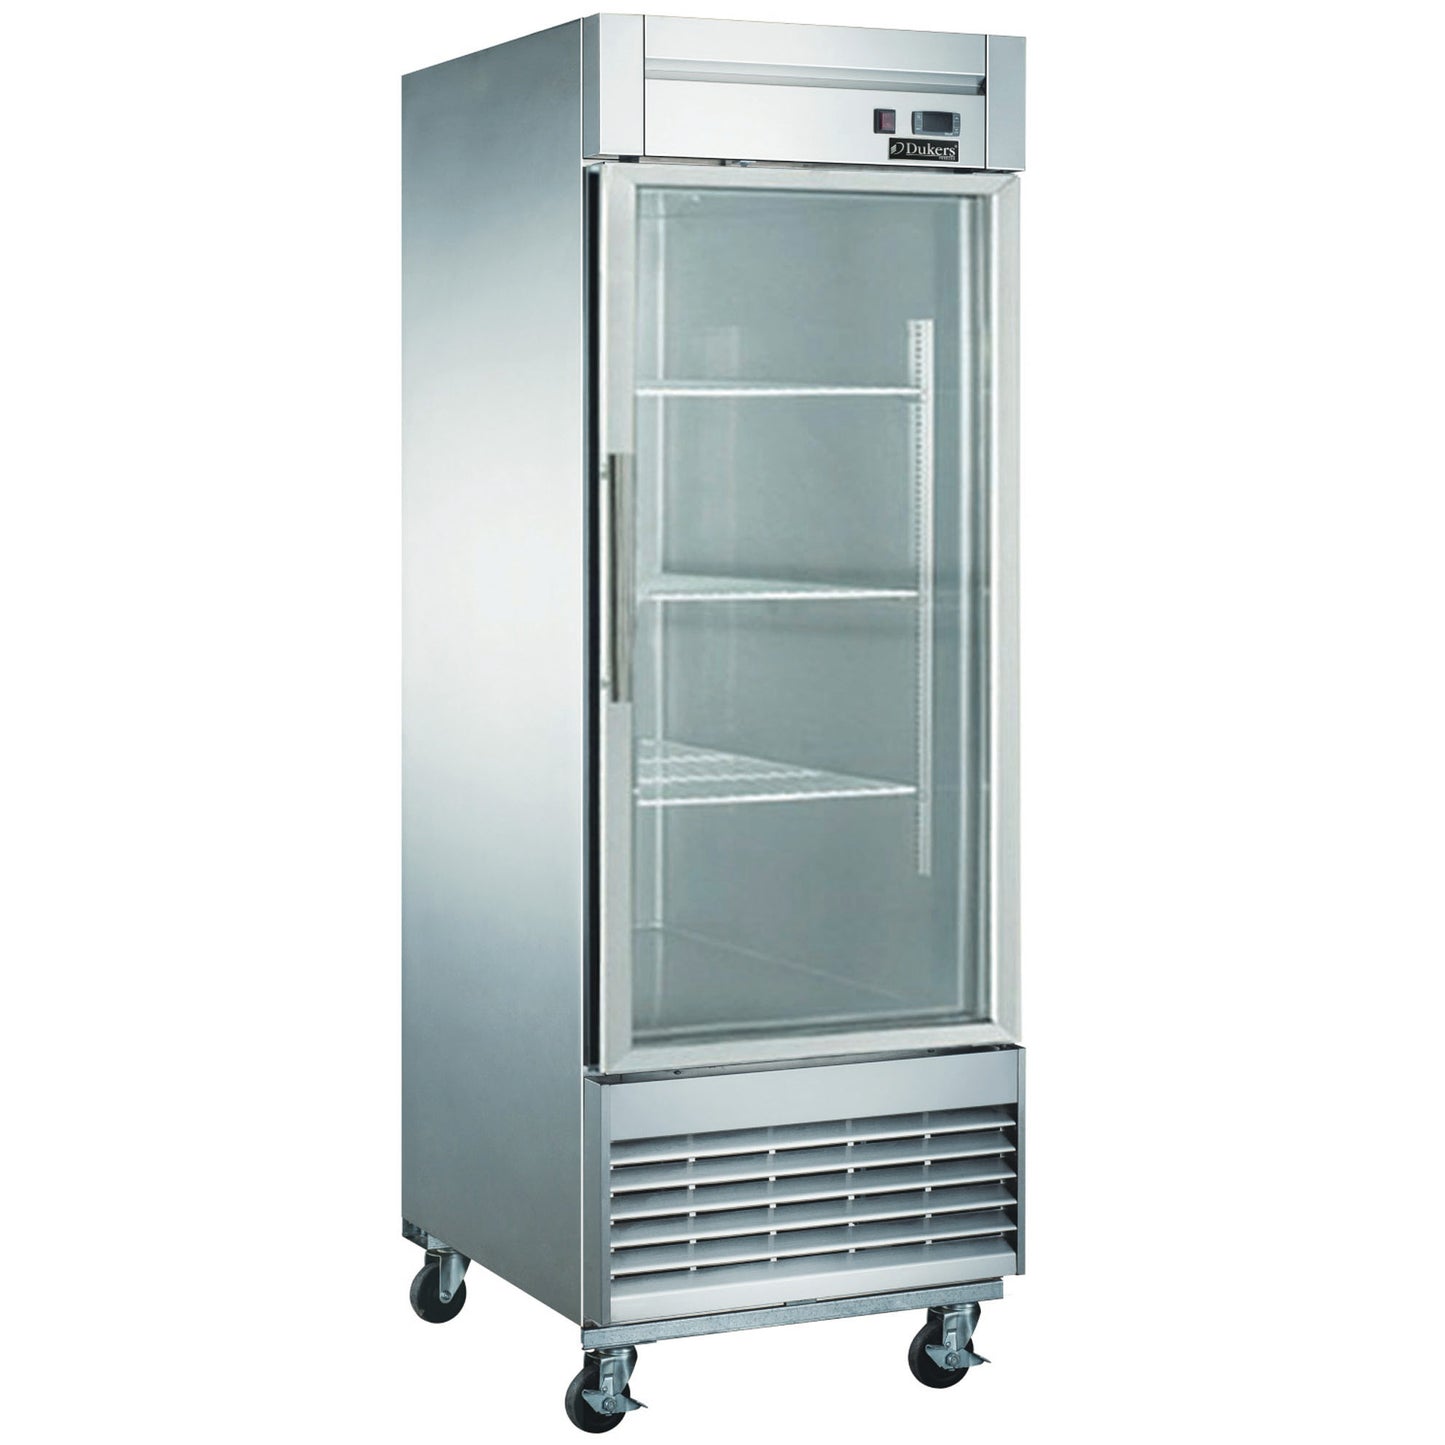 Dukers - D28R-GS1 Bottom Mount Glass Single Door Commercial Reach-in Refrigerator